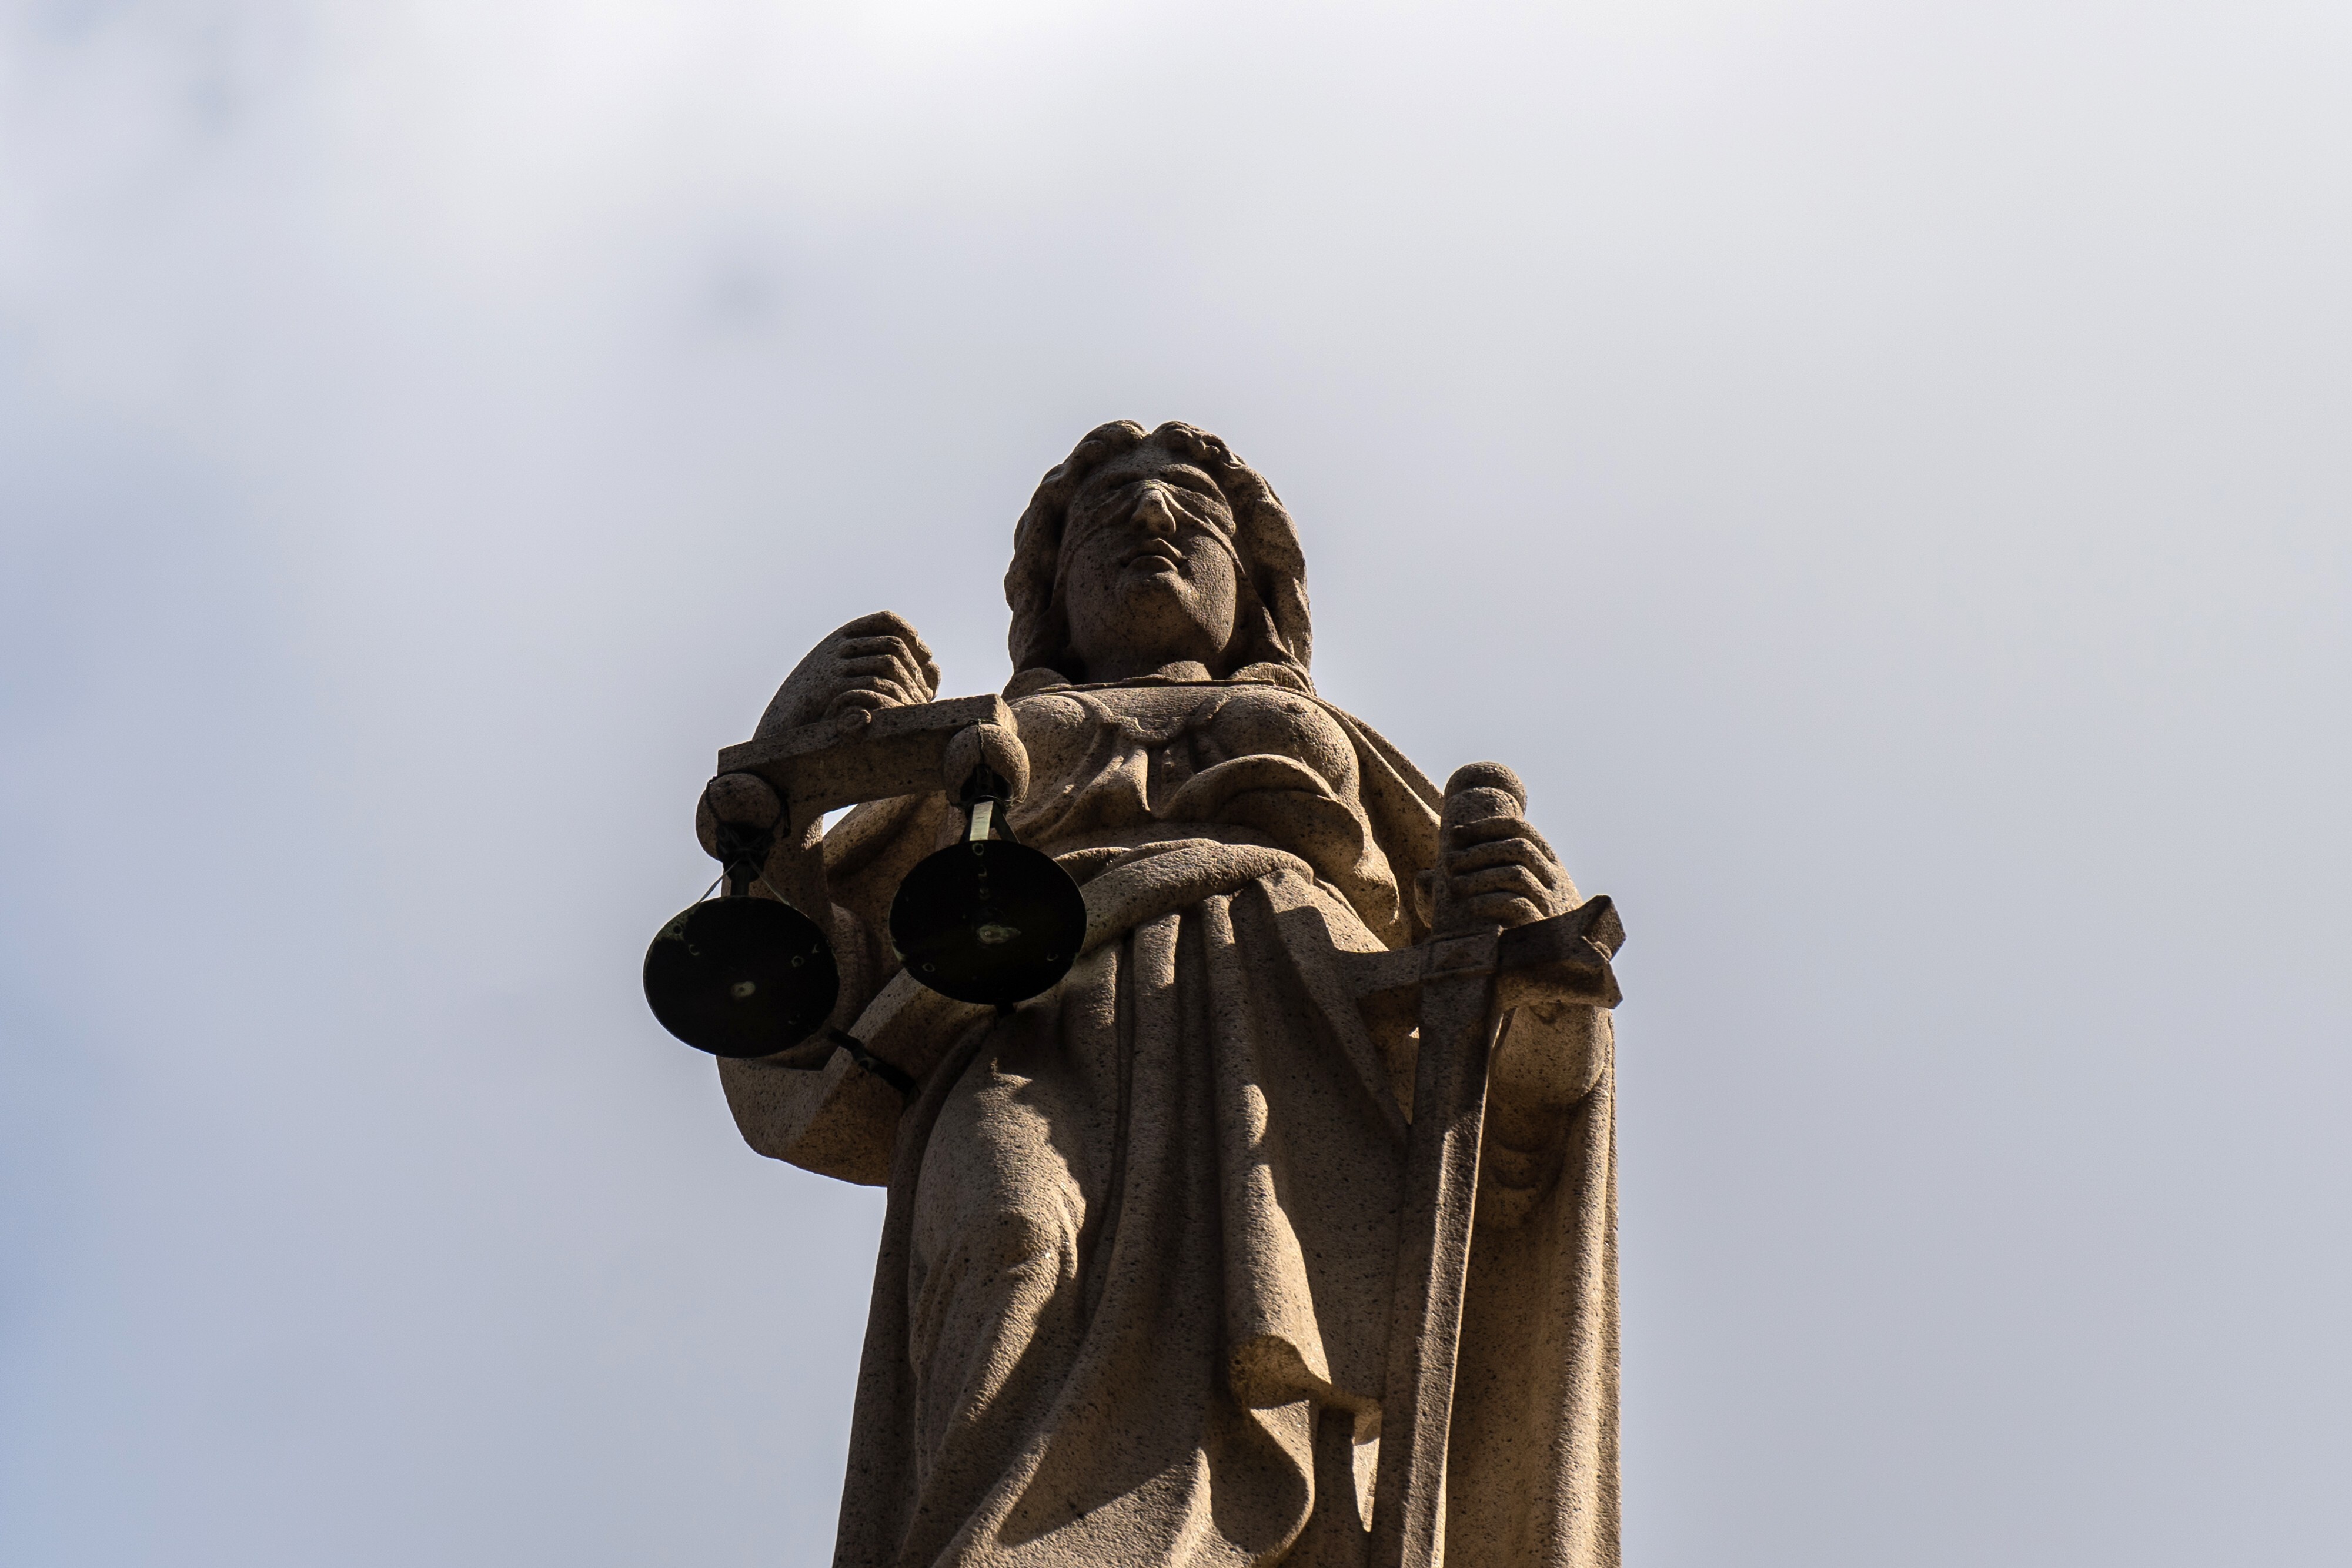 A statue of Lady Justice stands atop the Court of Final Appeal in Hong Kong on February 1. Photo: Bloomberg